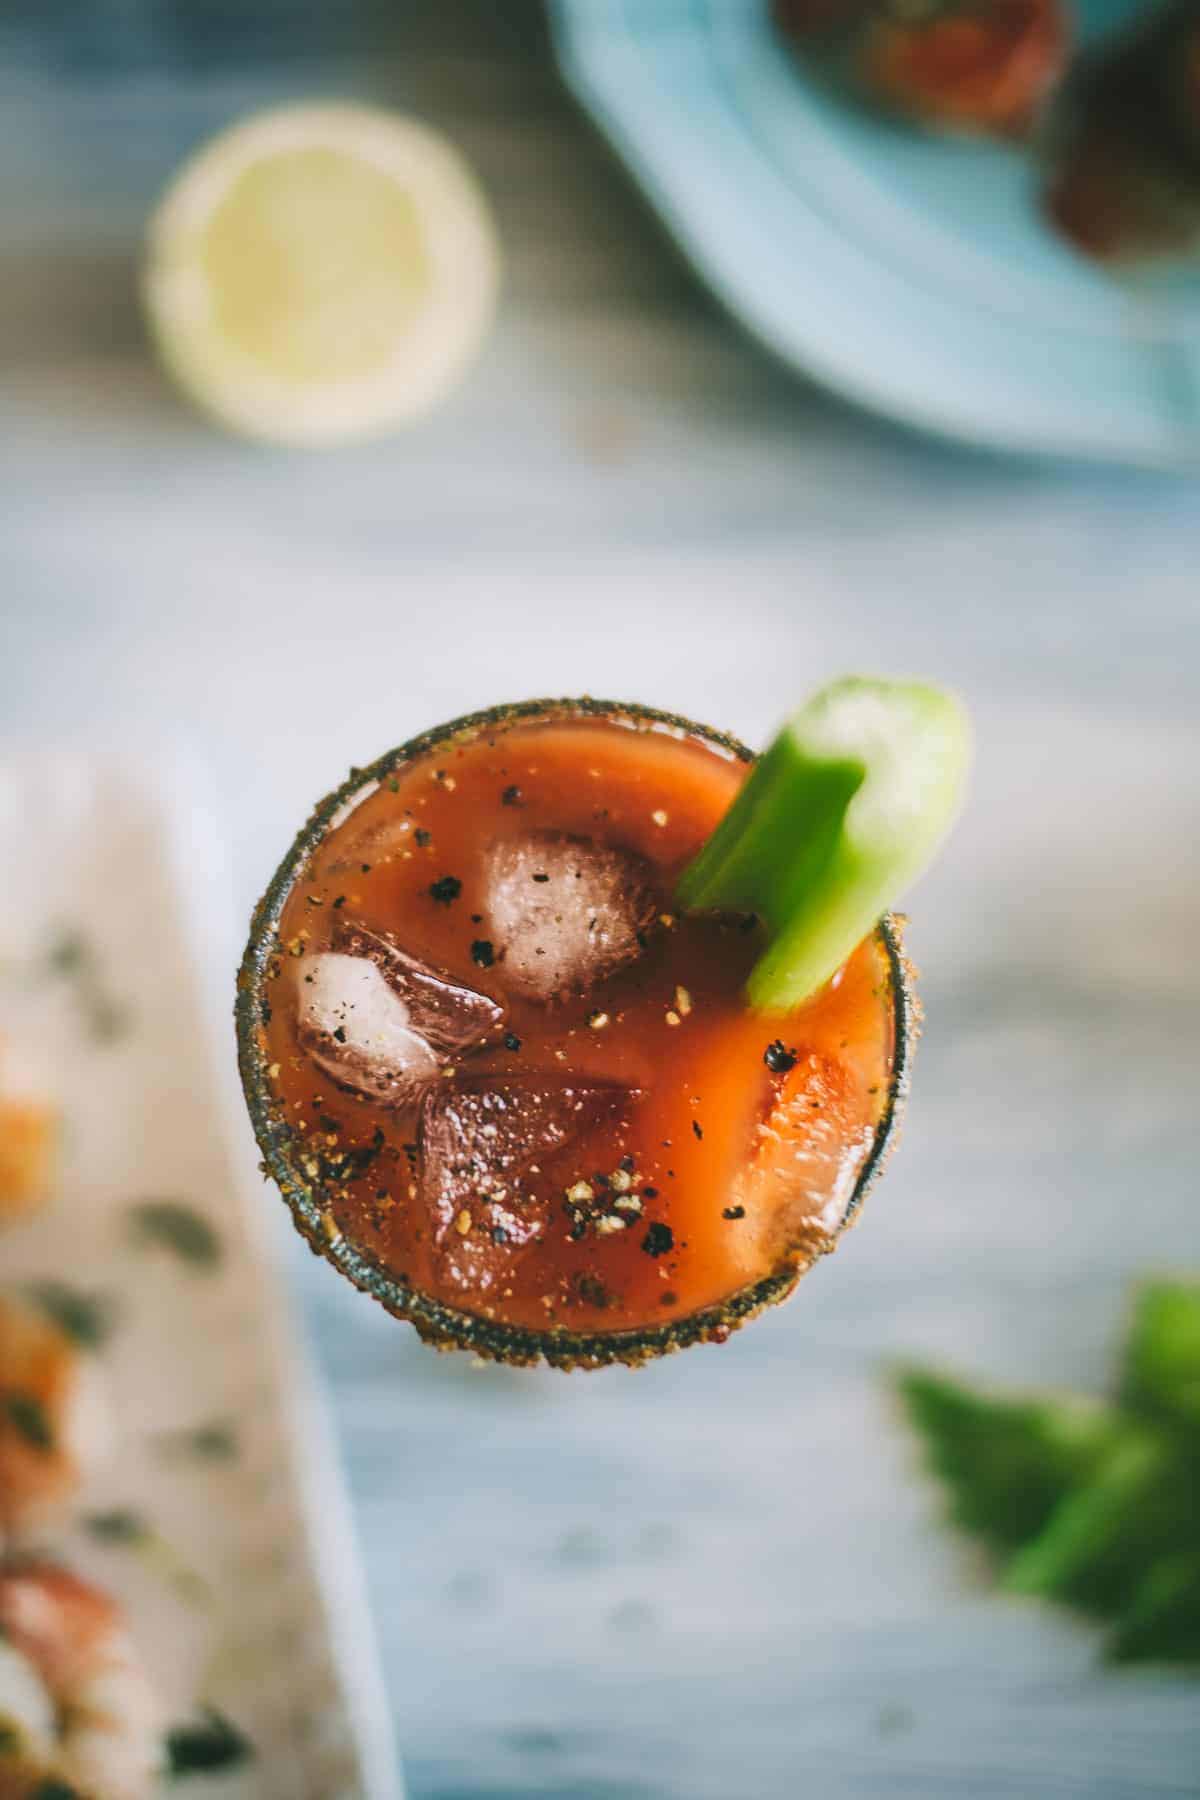 Bloody Mary cocktail with celery garnish